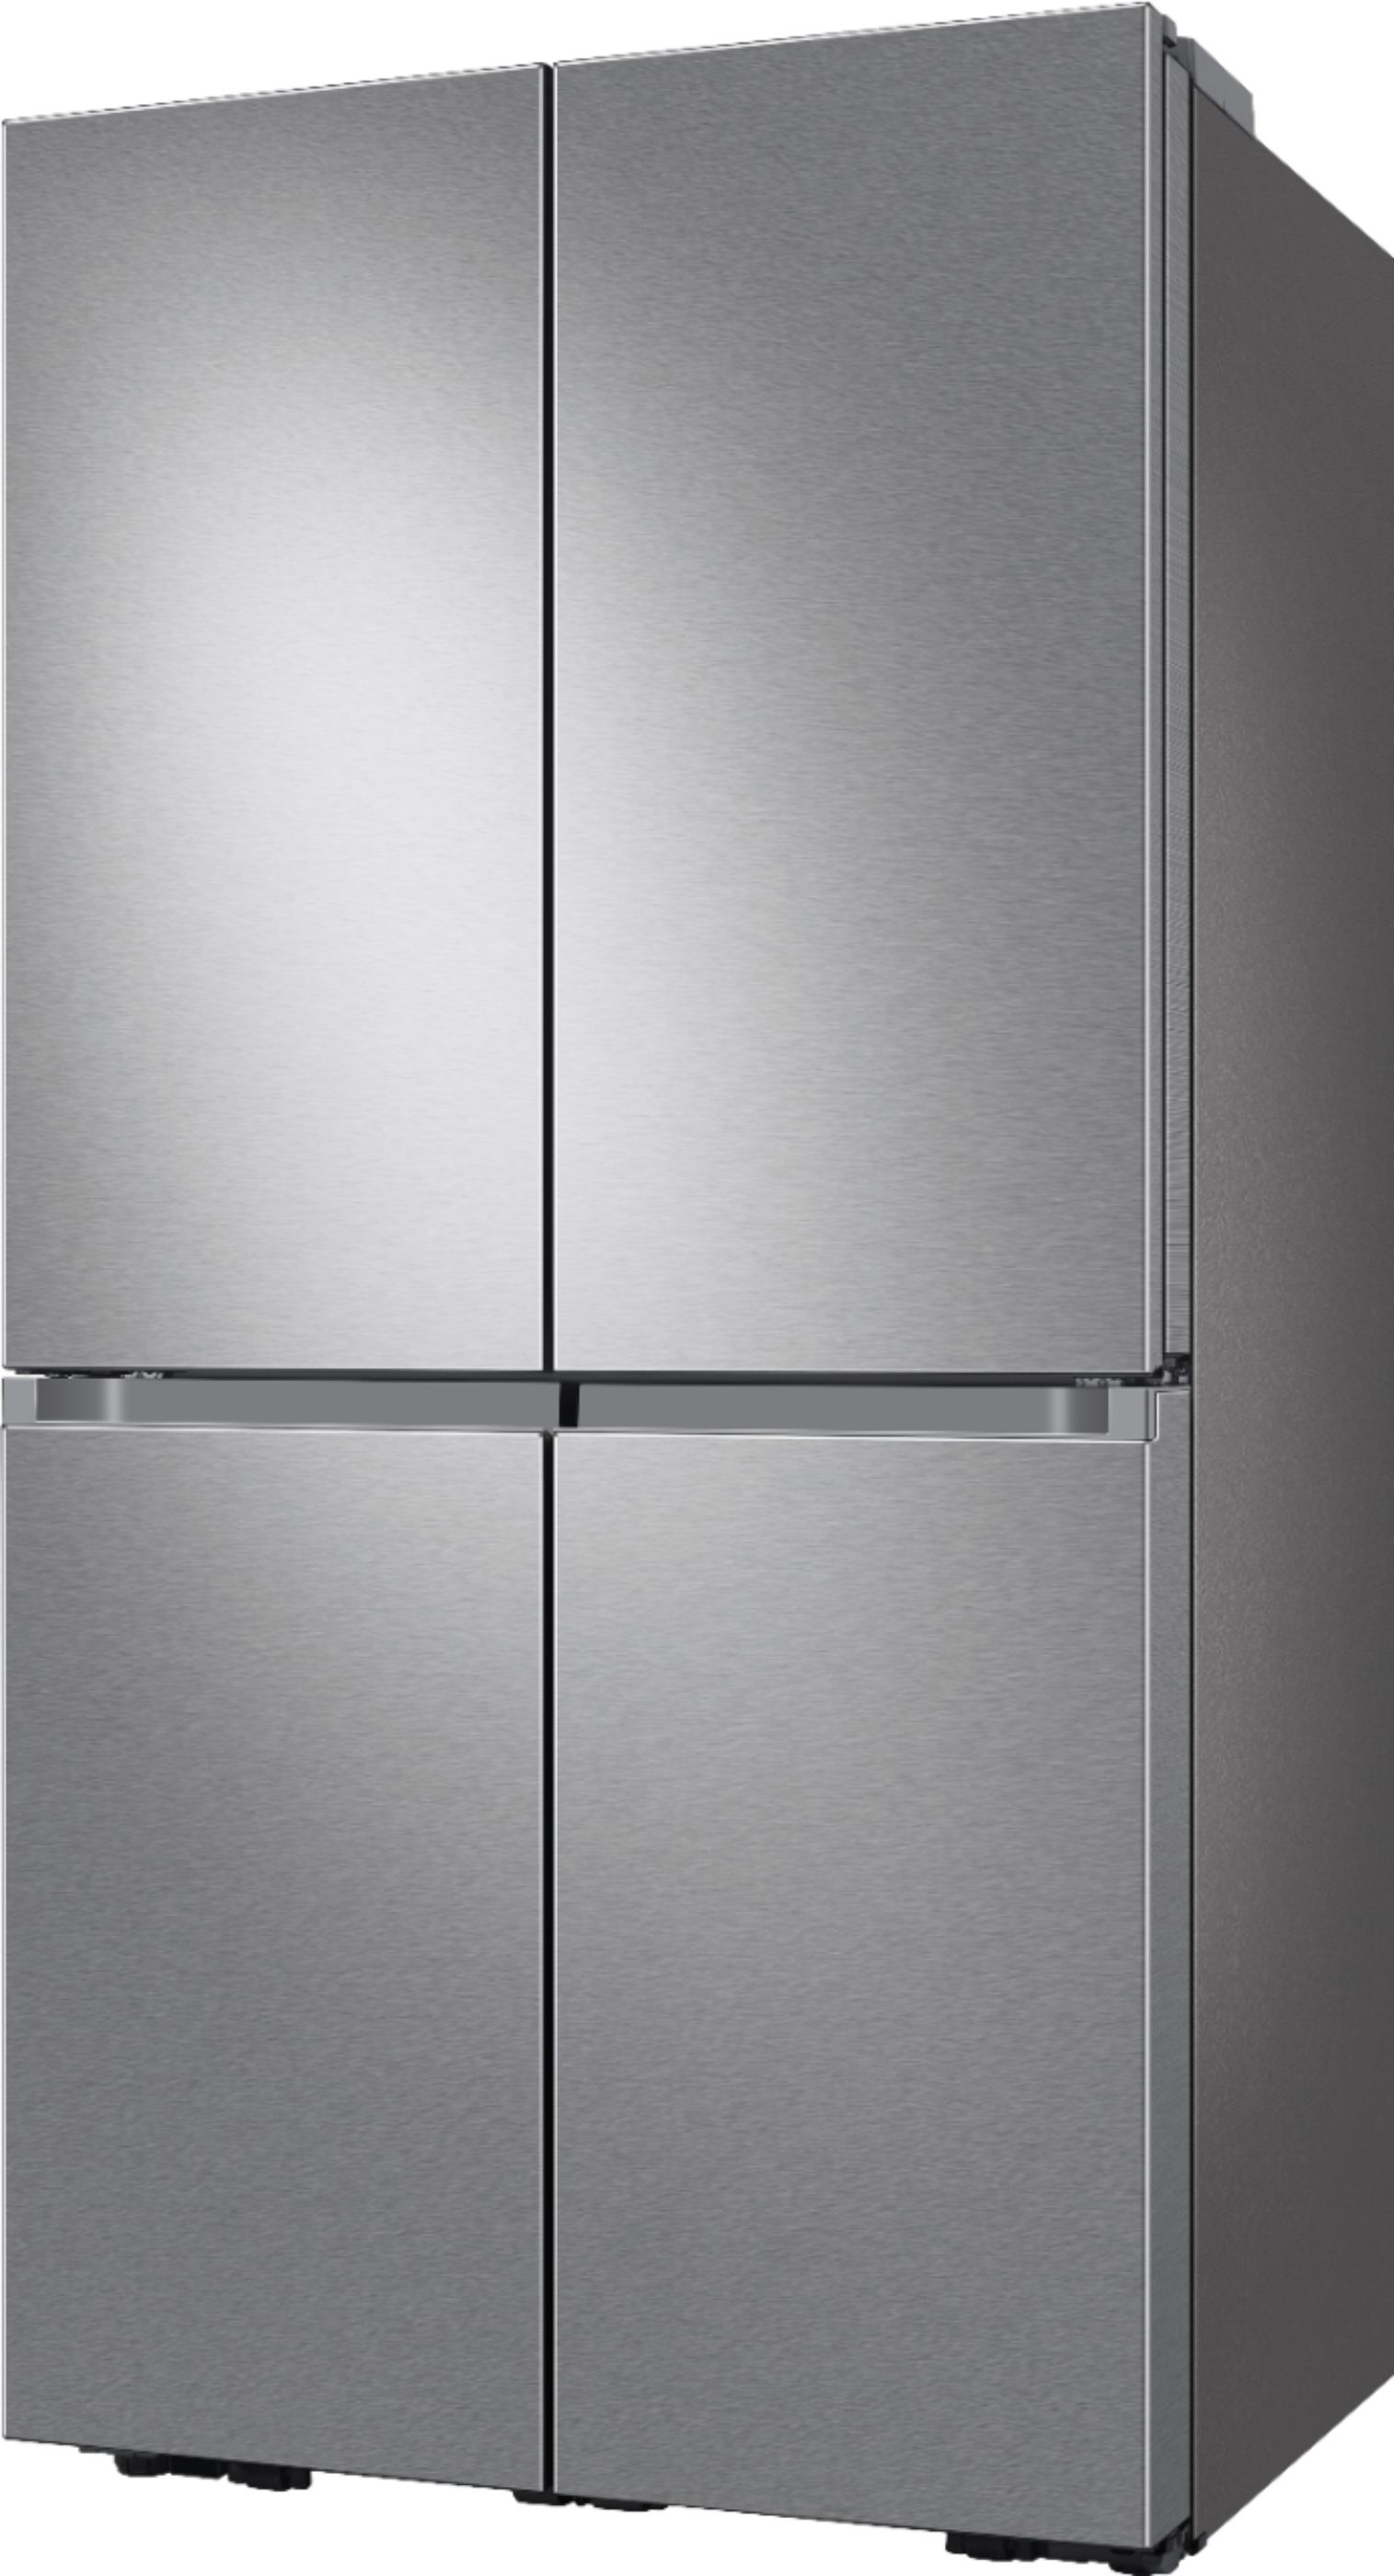 Angle View: Samsung - Bespoke 24 cu. ft. Counter Depth 3-Door French Door Refrigerator with AutoFill Water Pitcher - Custom Panel Ready